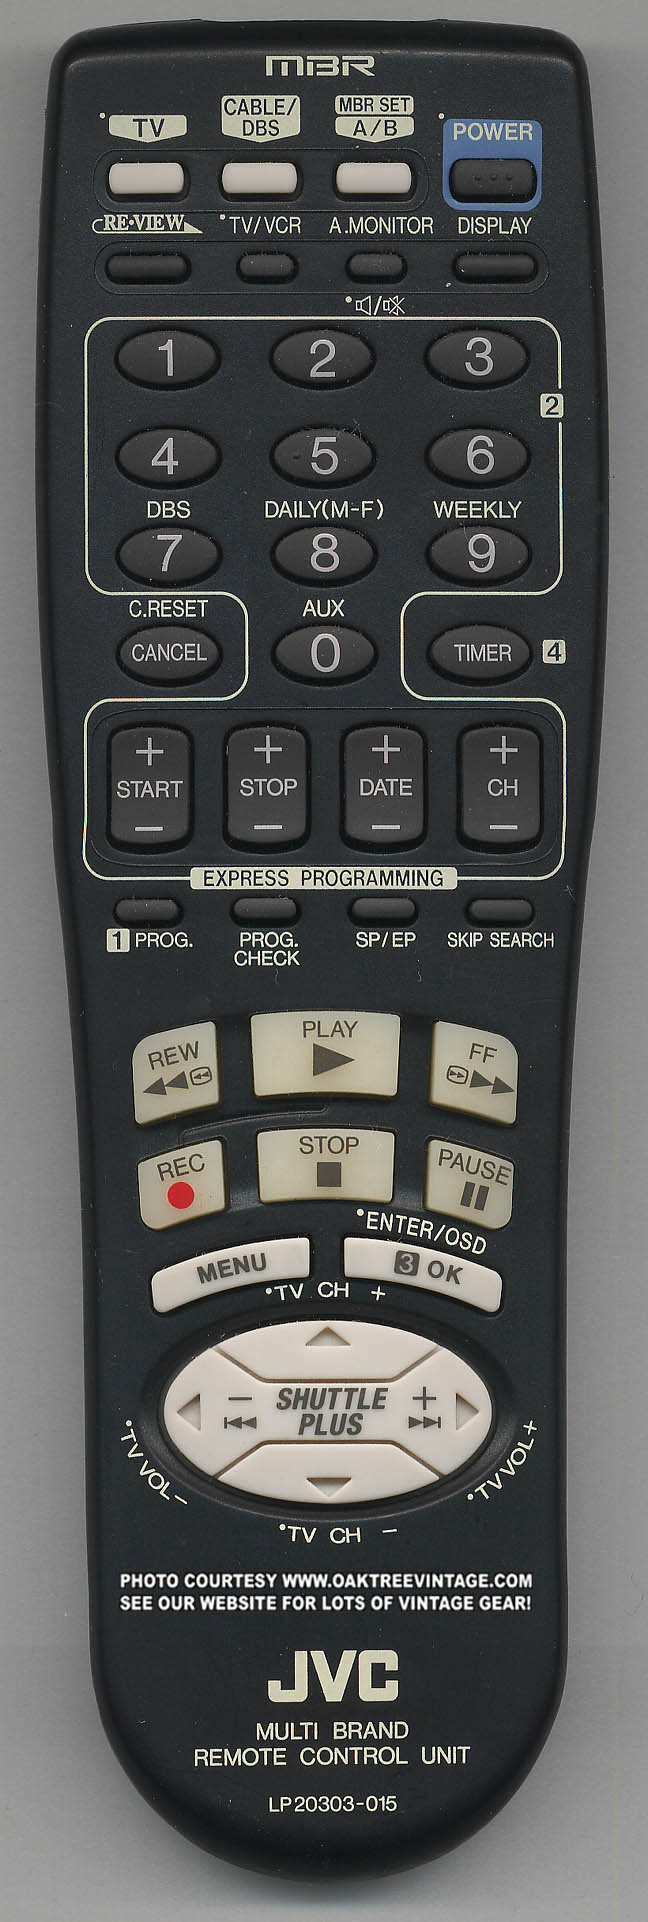 universal control codes stereo jvc